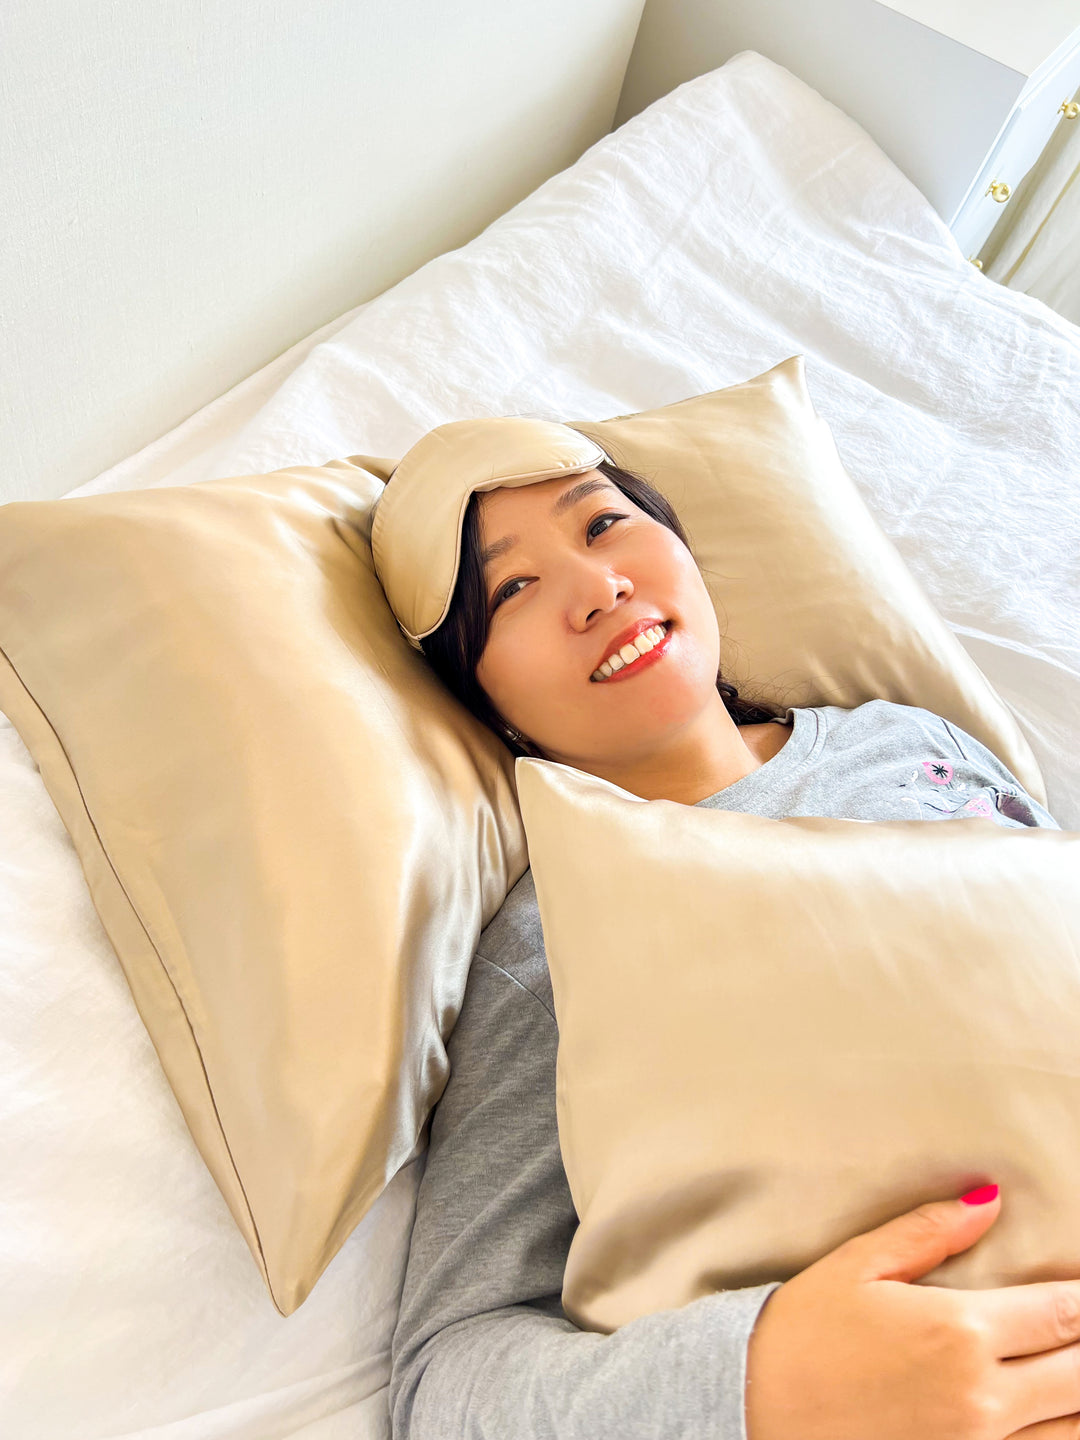 Beauty Sleep Made Easy: The Benefits of Pure Silk Pillowcases